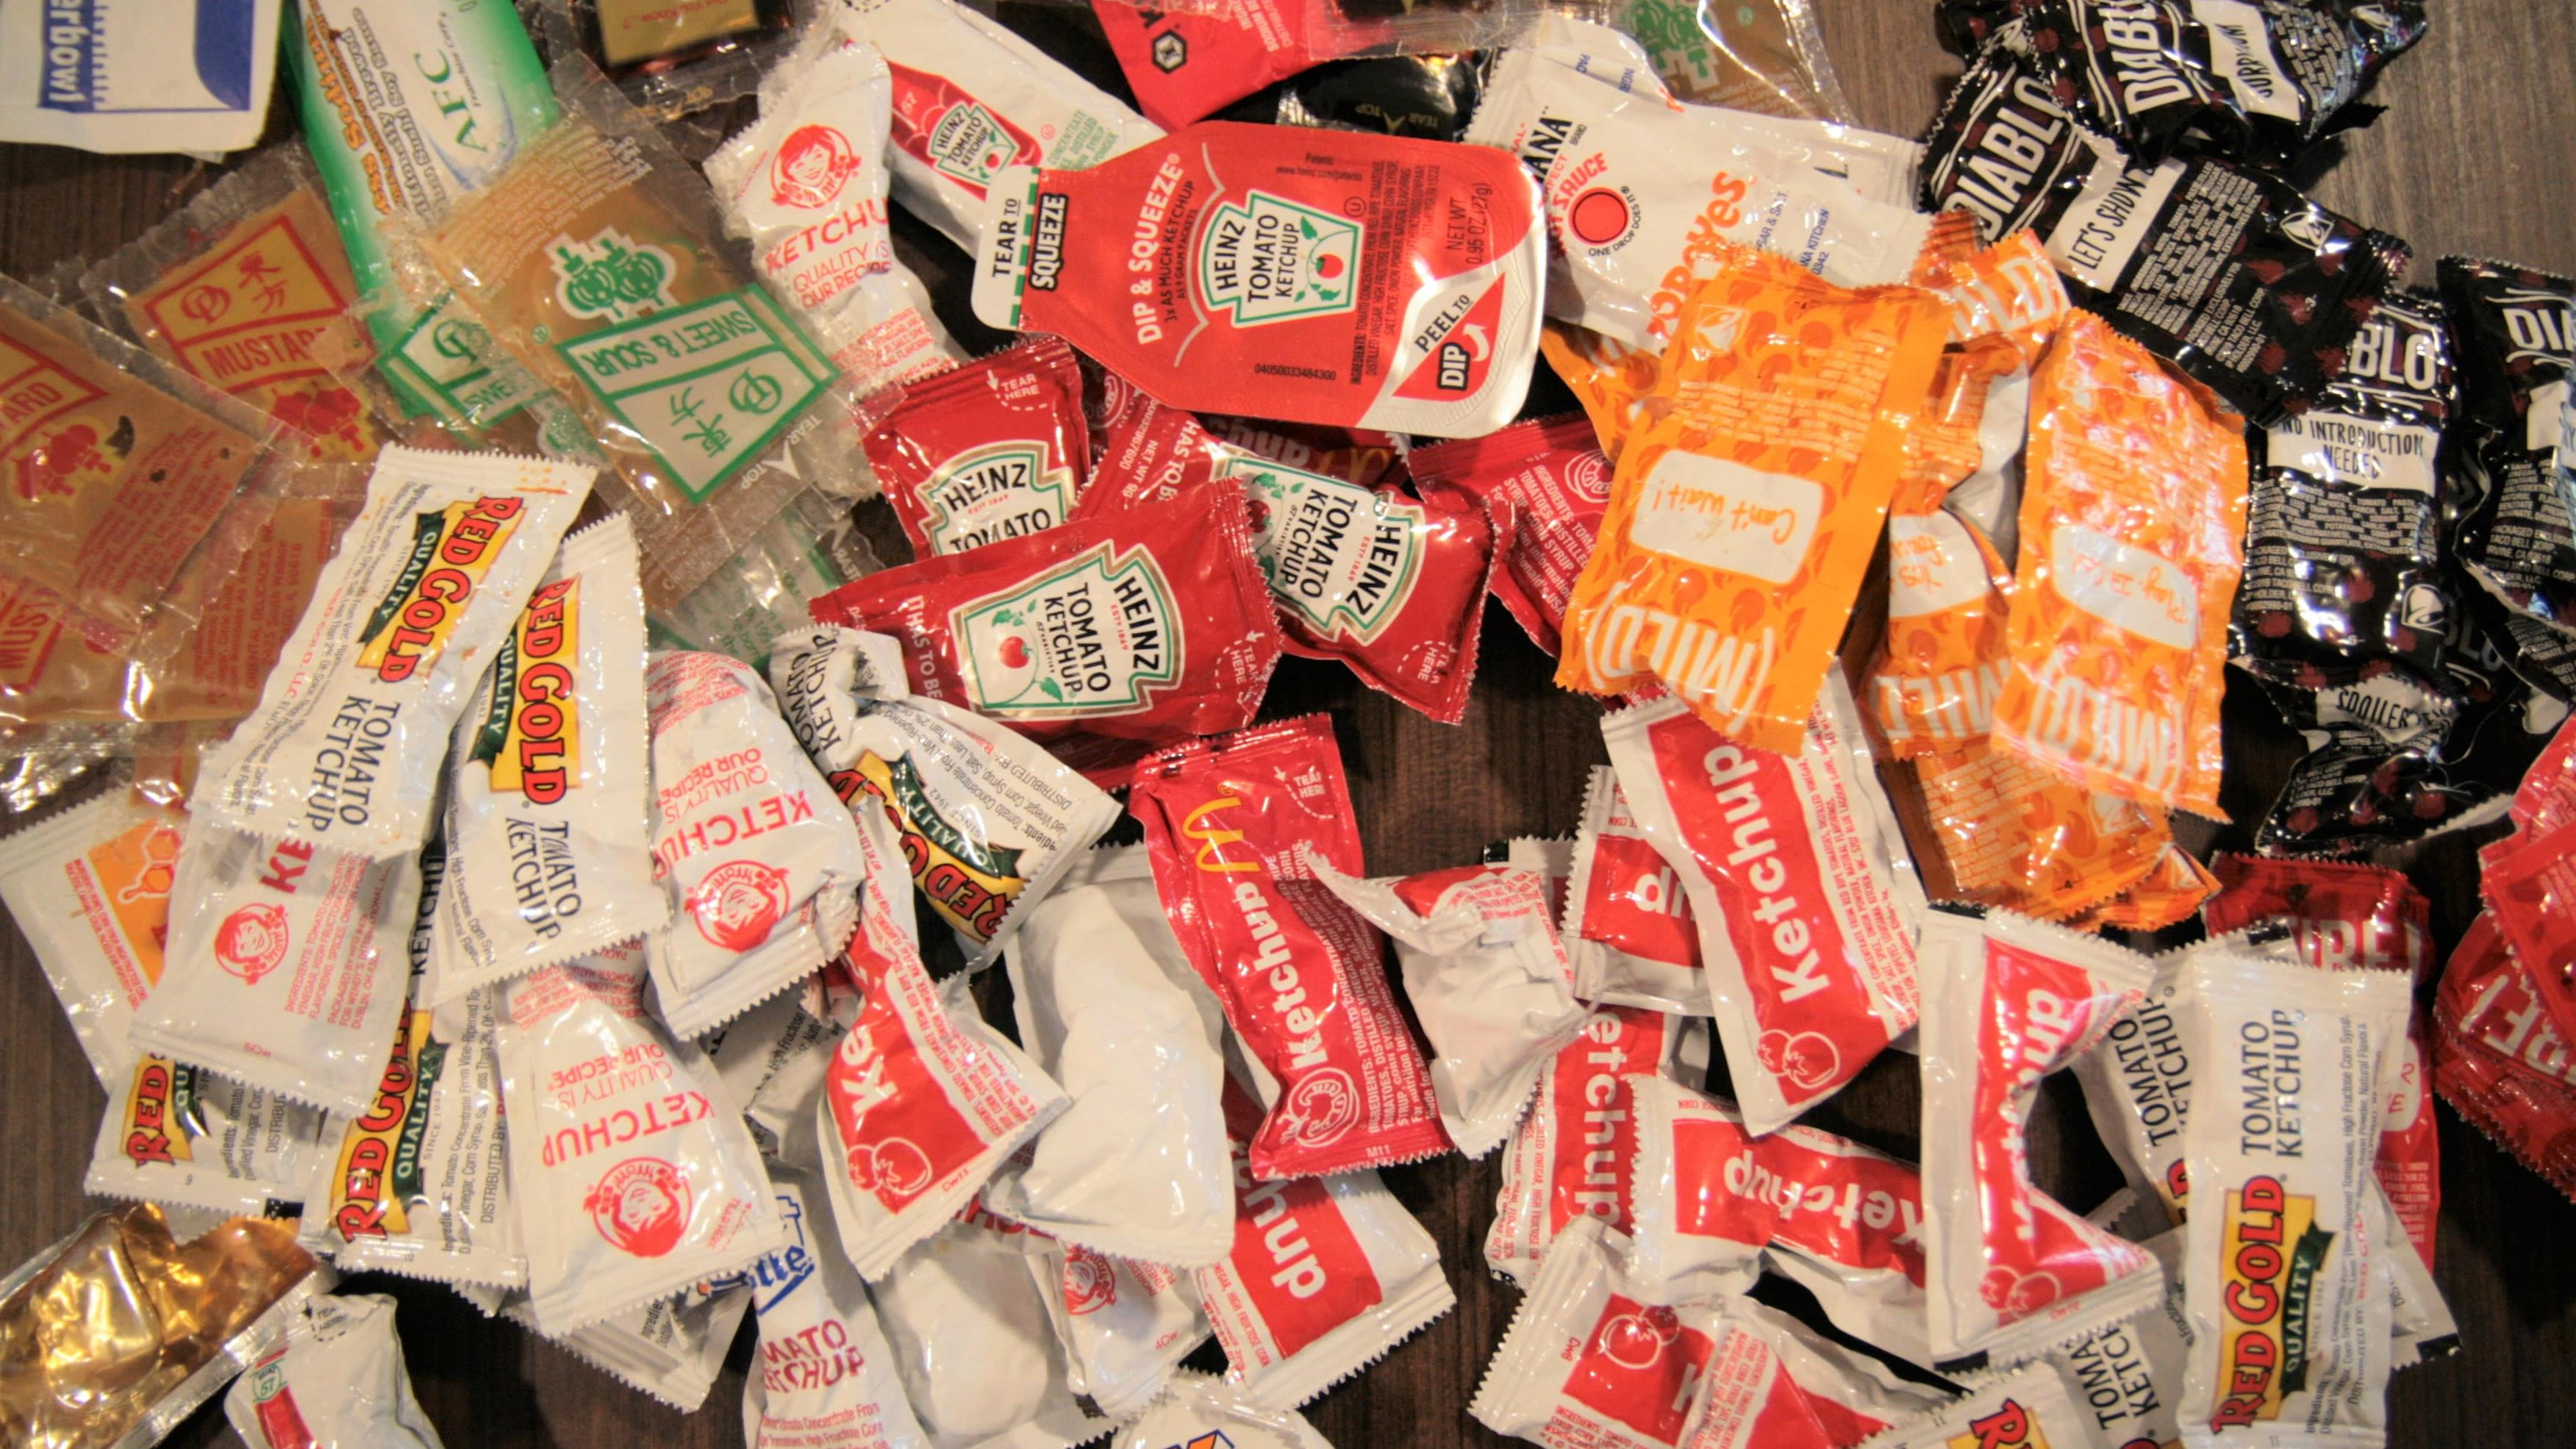 large amount of condiment packets